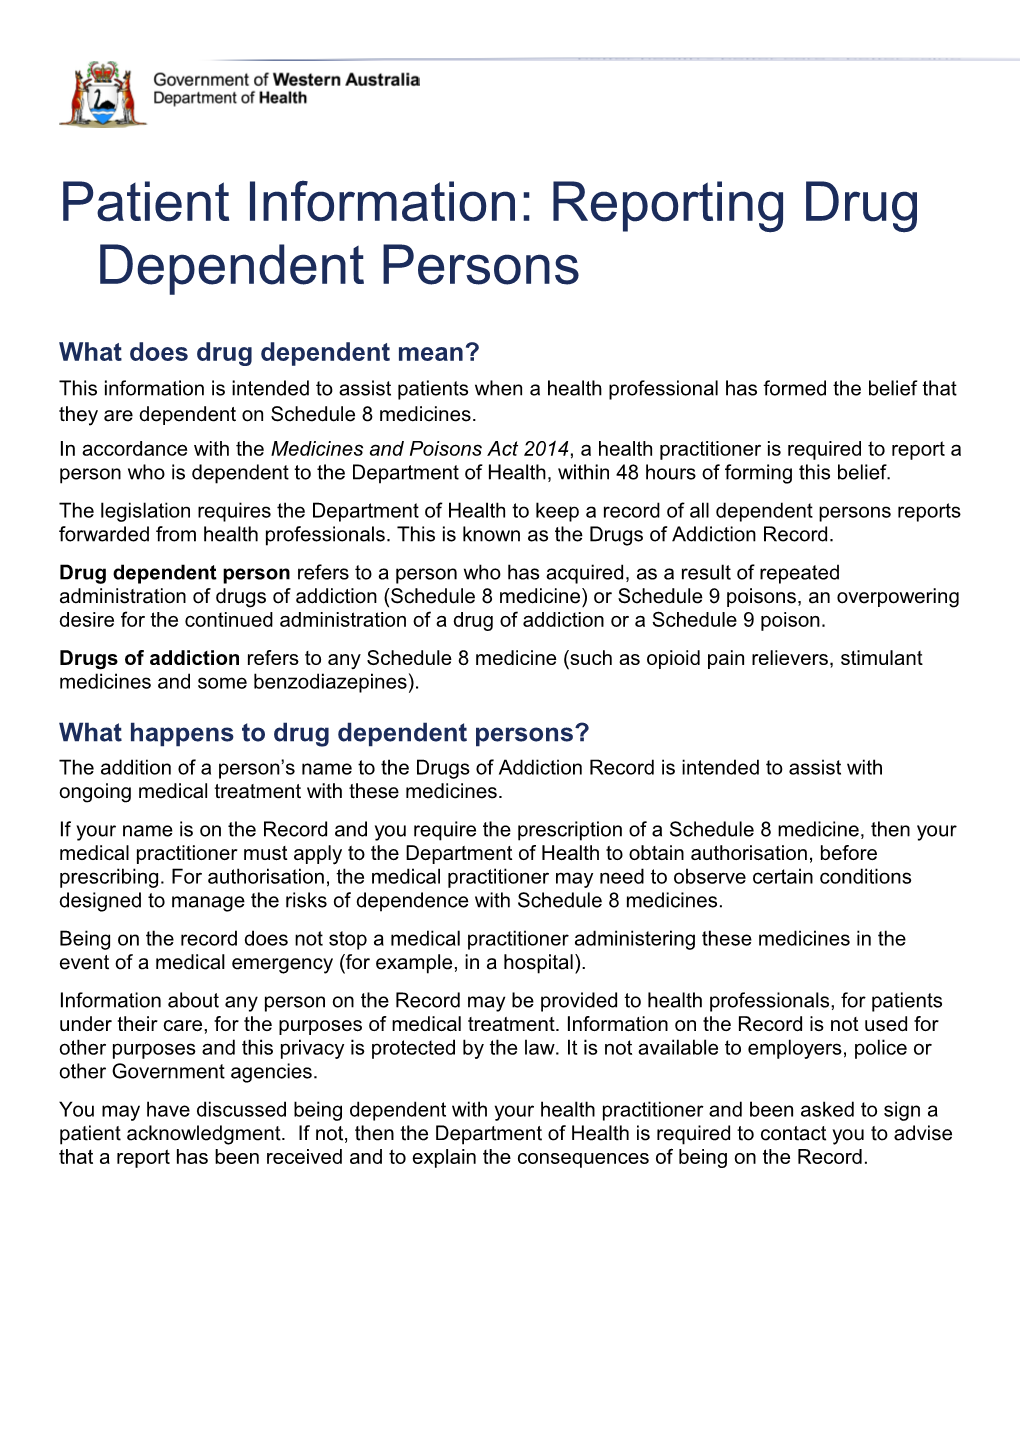 Patient Information: Reporting Drug Dependent Persons